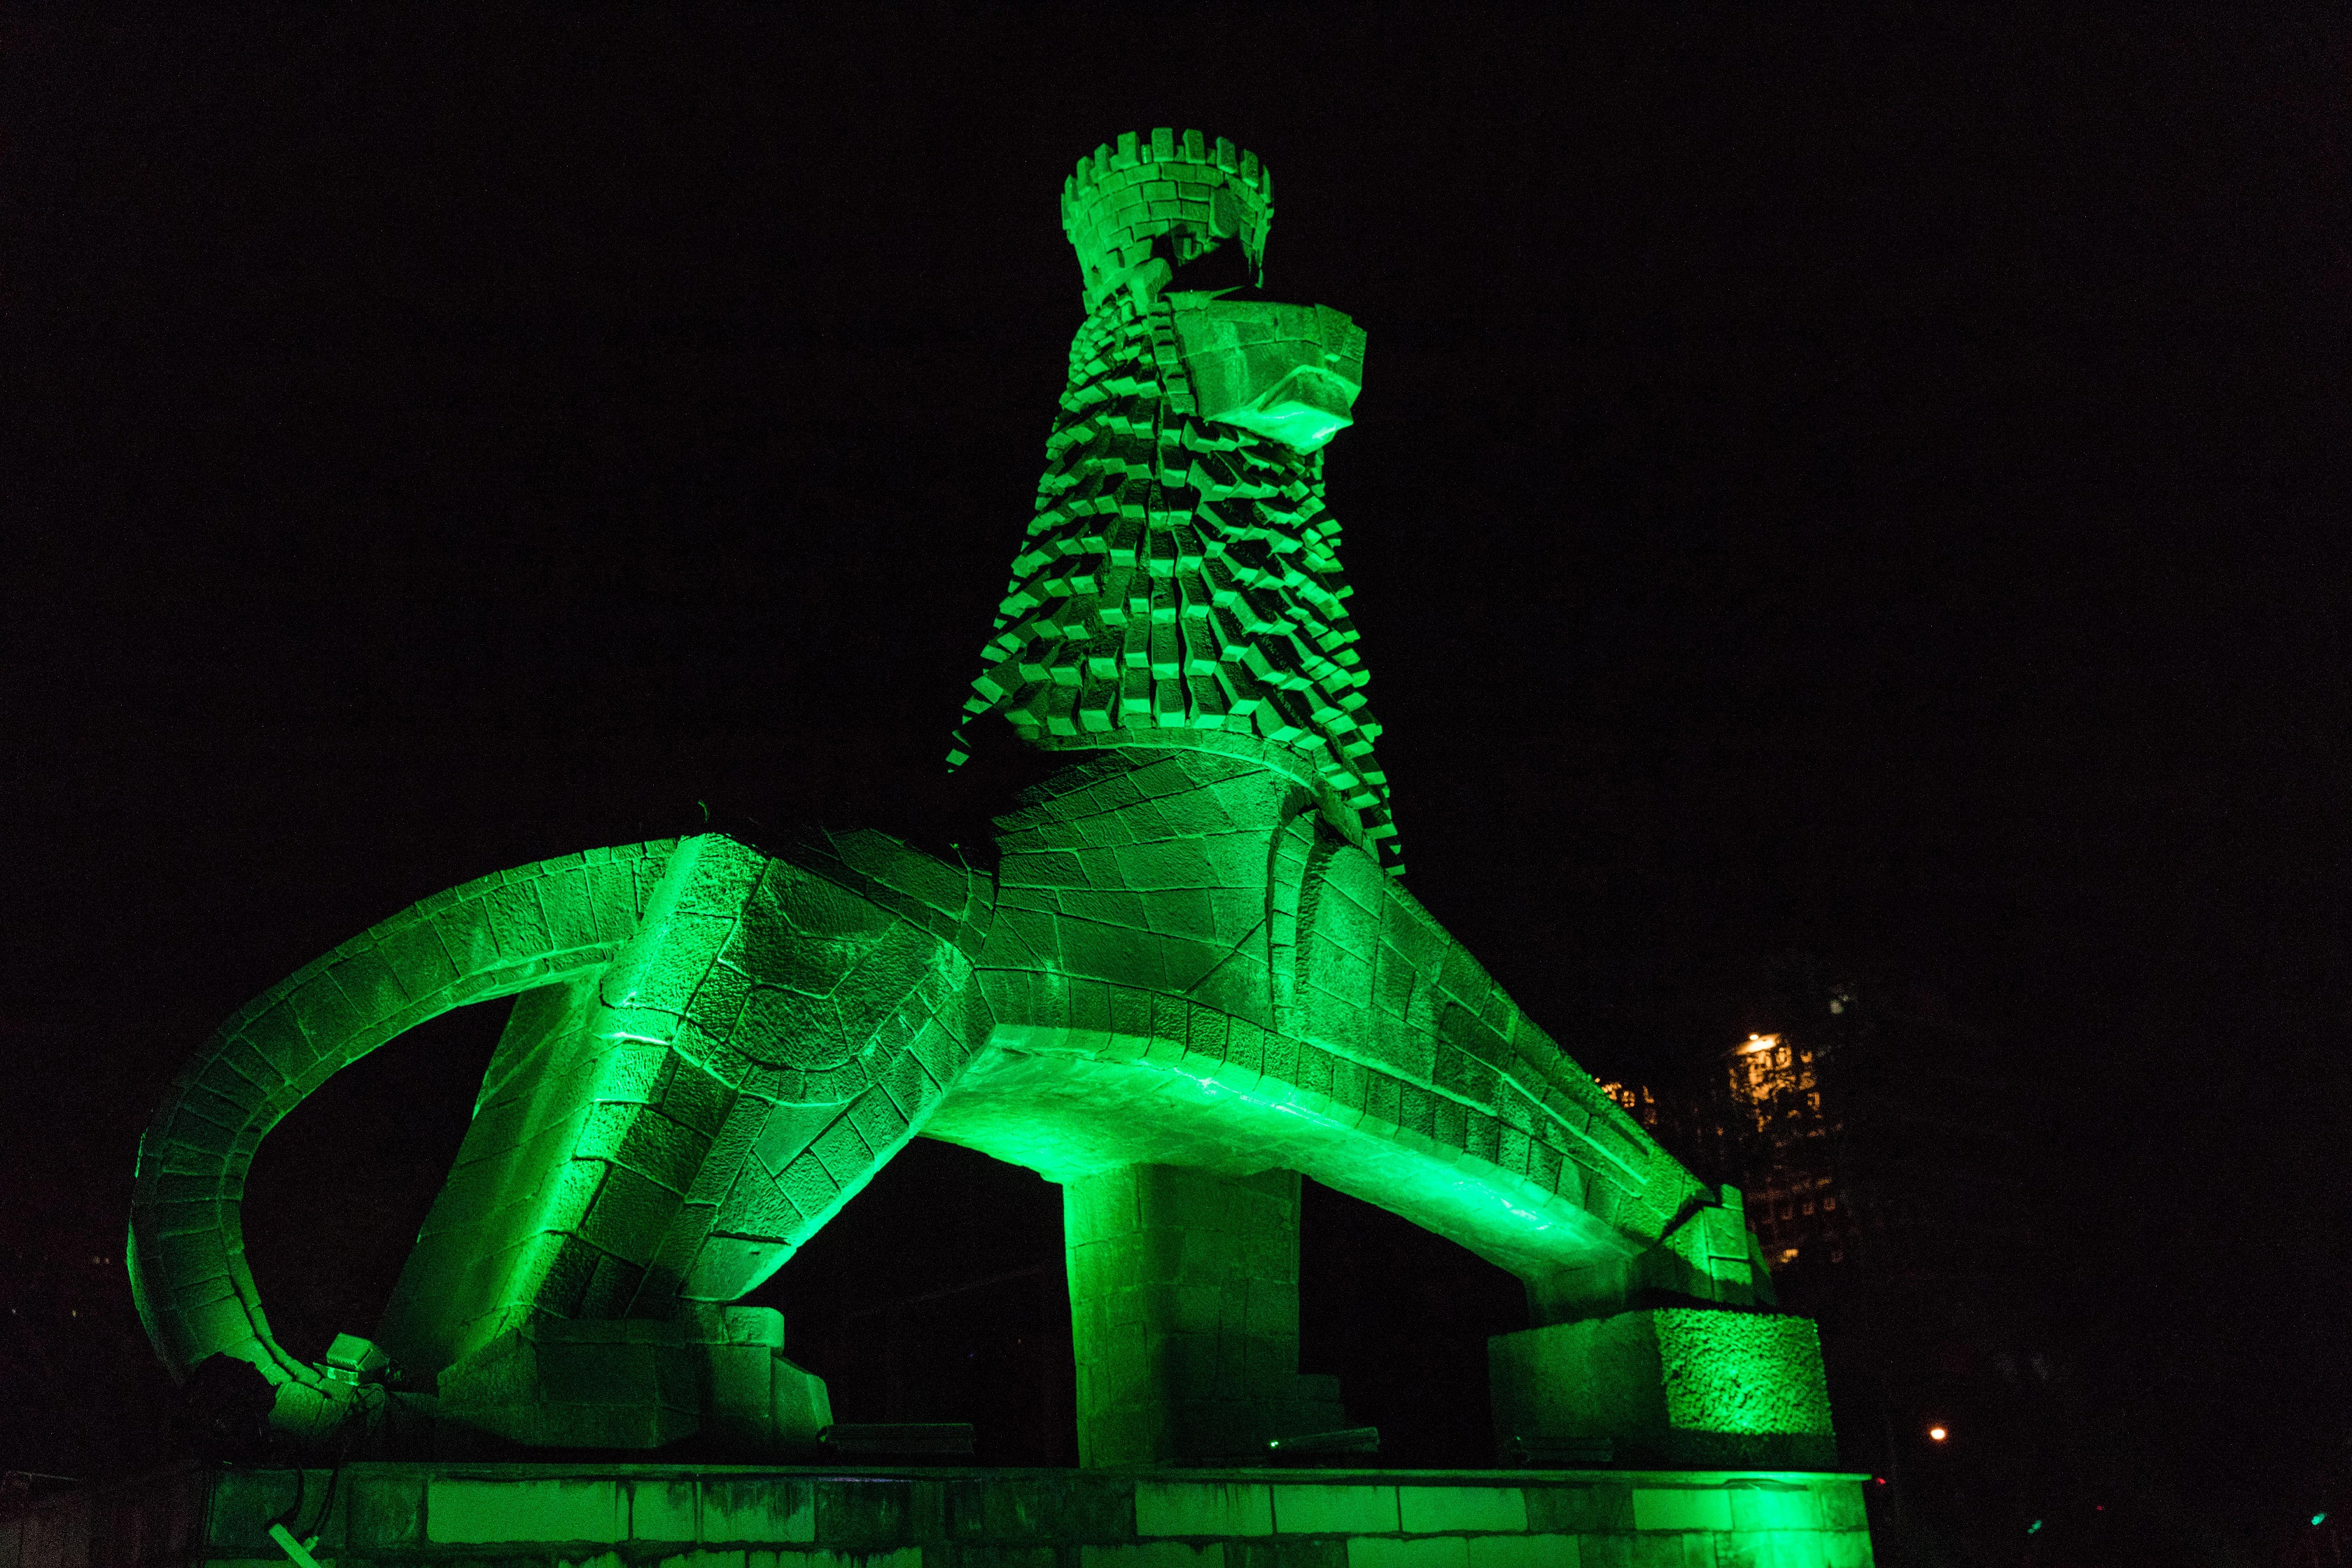 The Lion of Judah monument in Addis Ababa, Ethiopia, was illuminated in green (Tourism Ireland/PA)